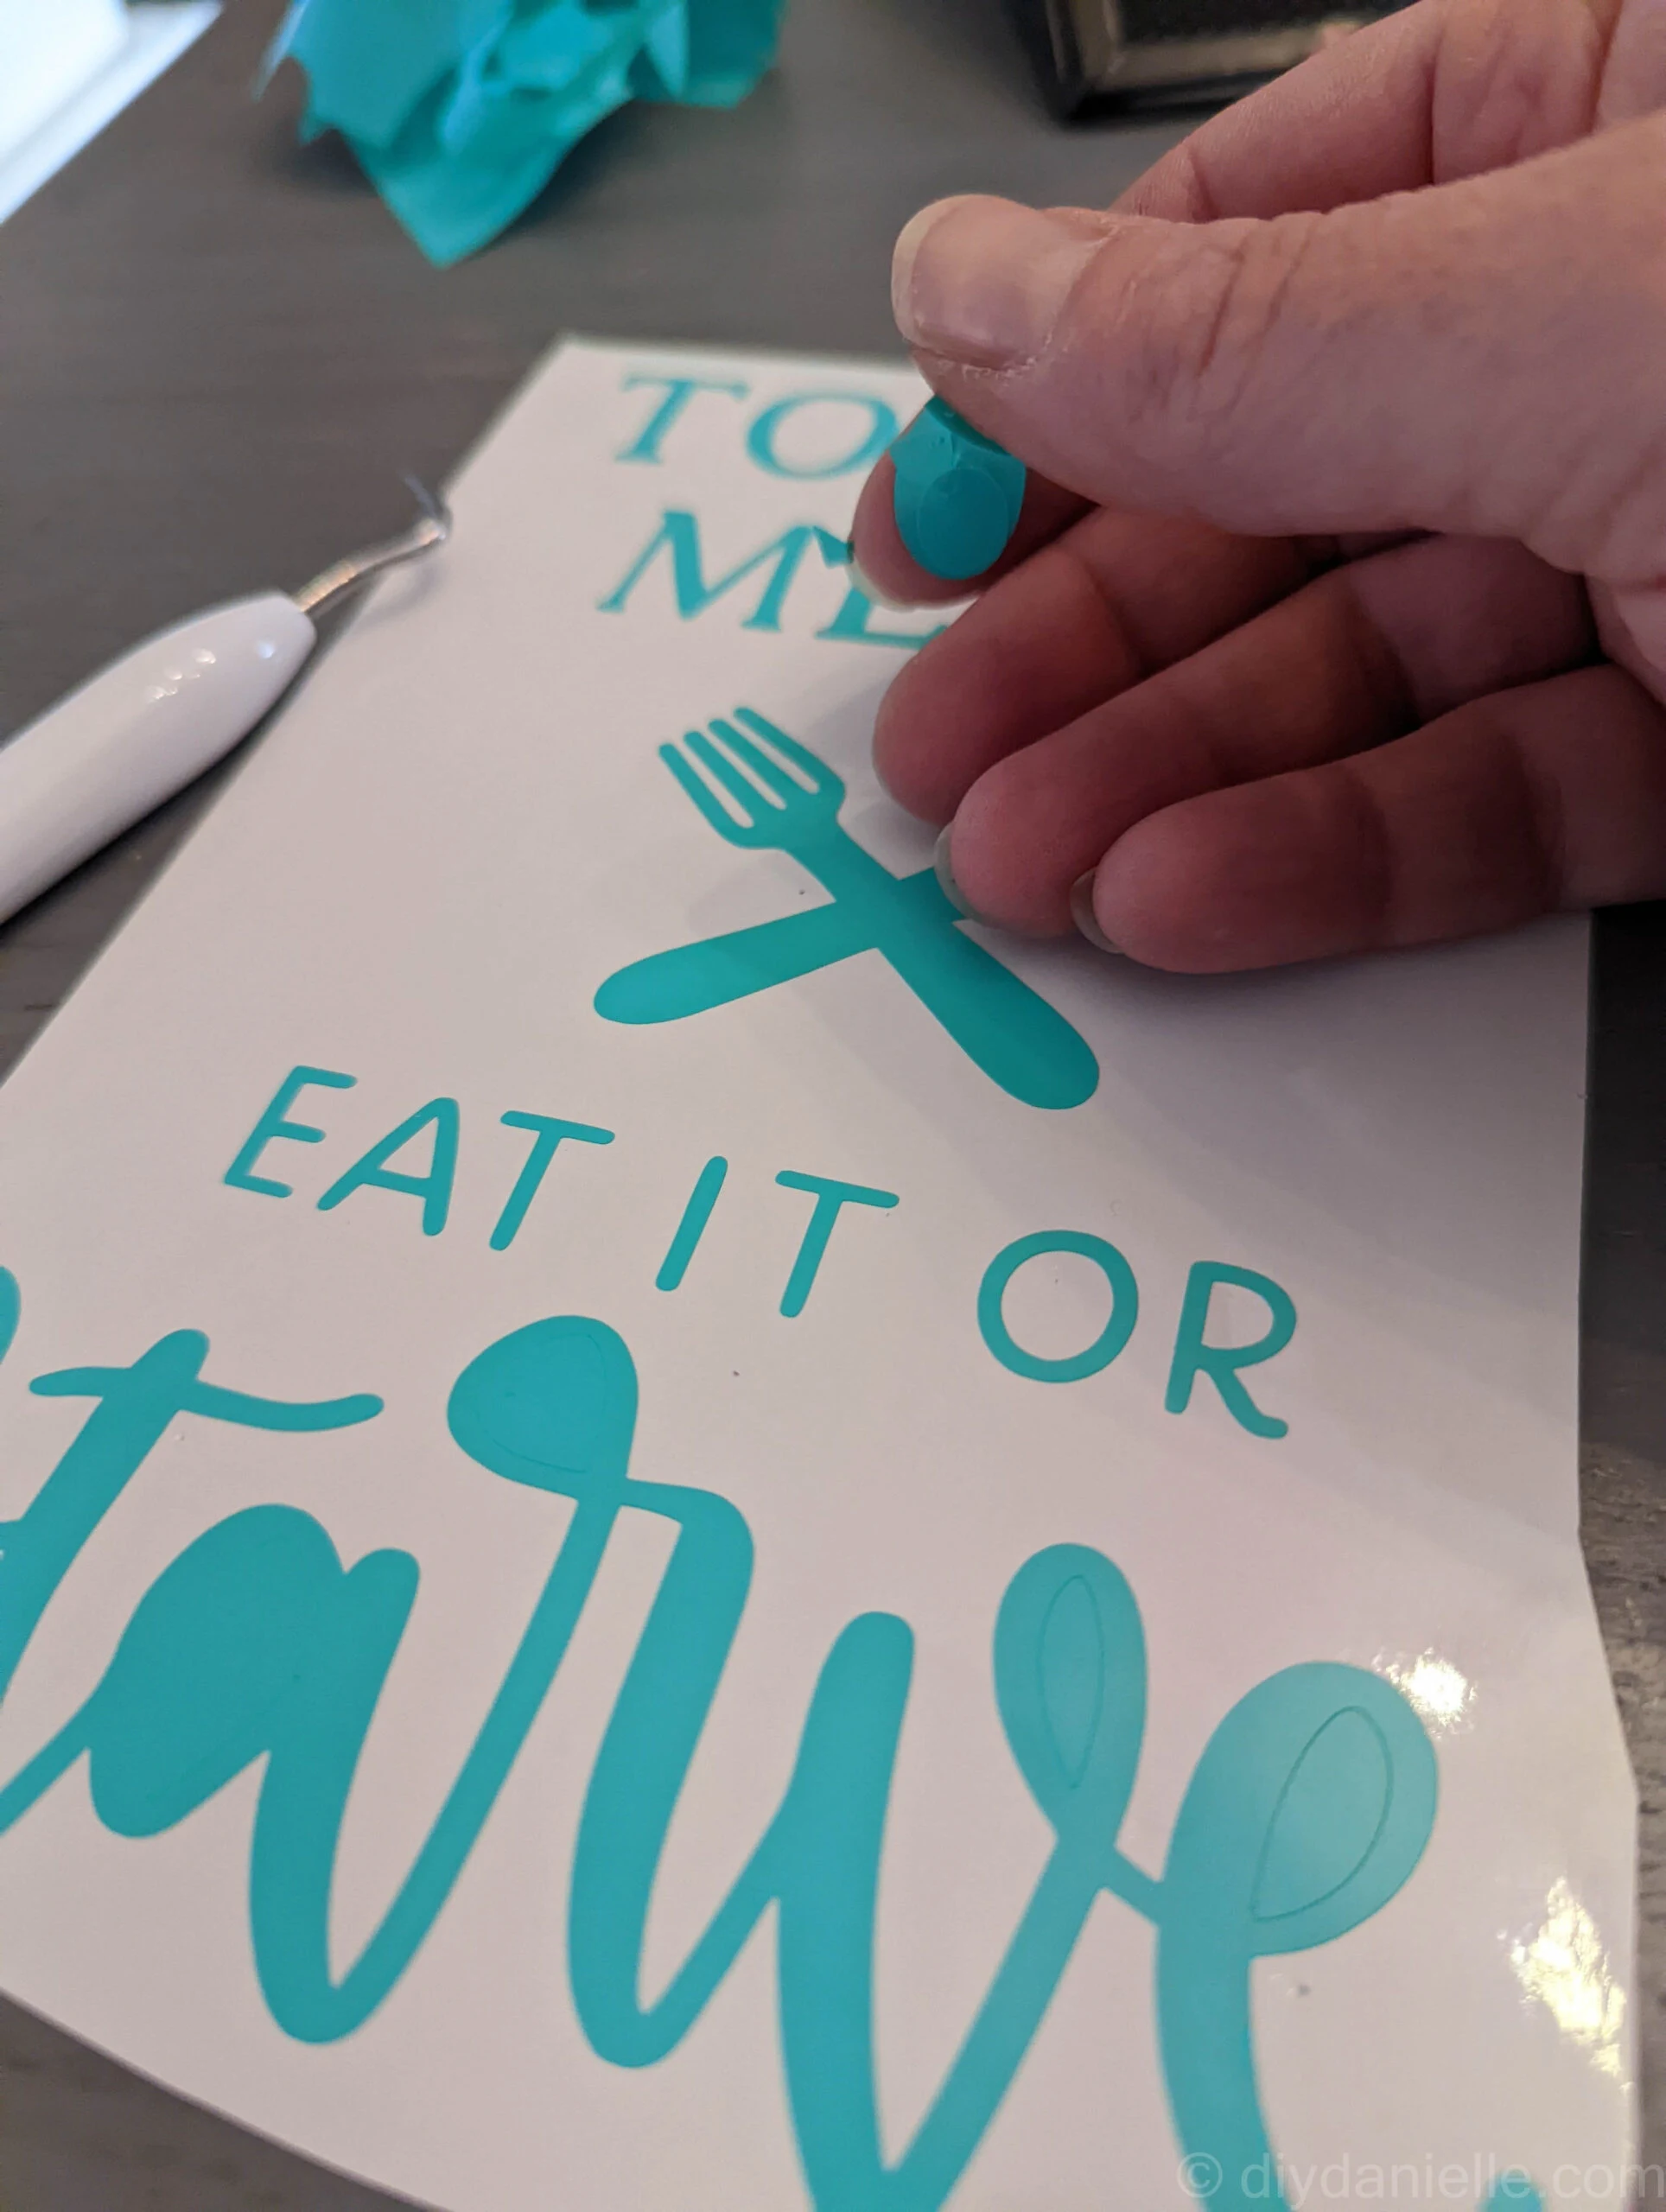 Weeding a wall decal that says "eat it or starve."